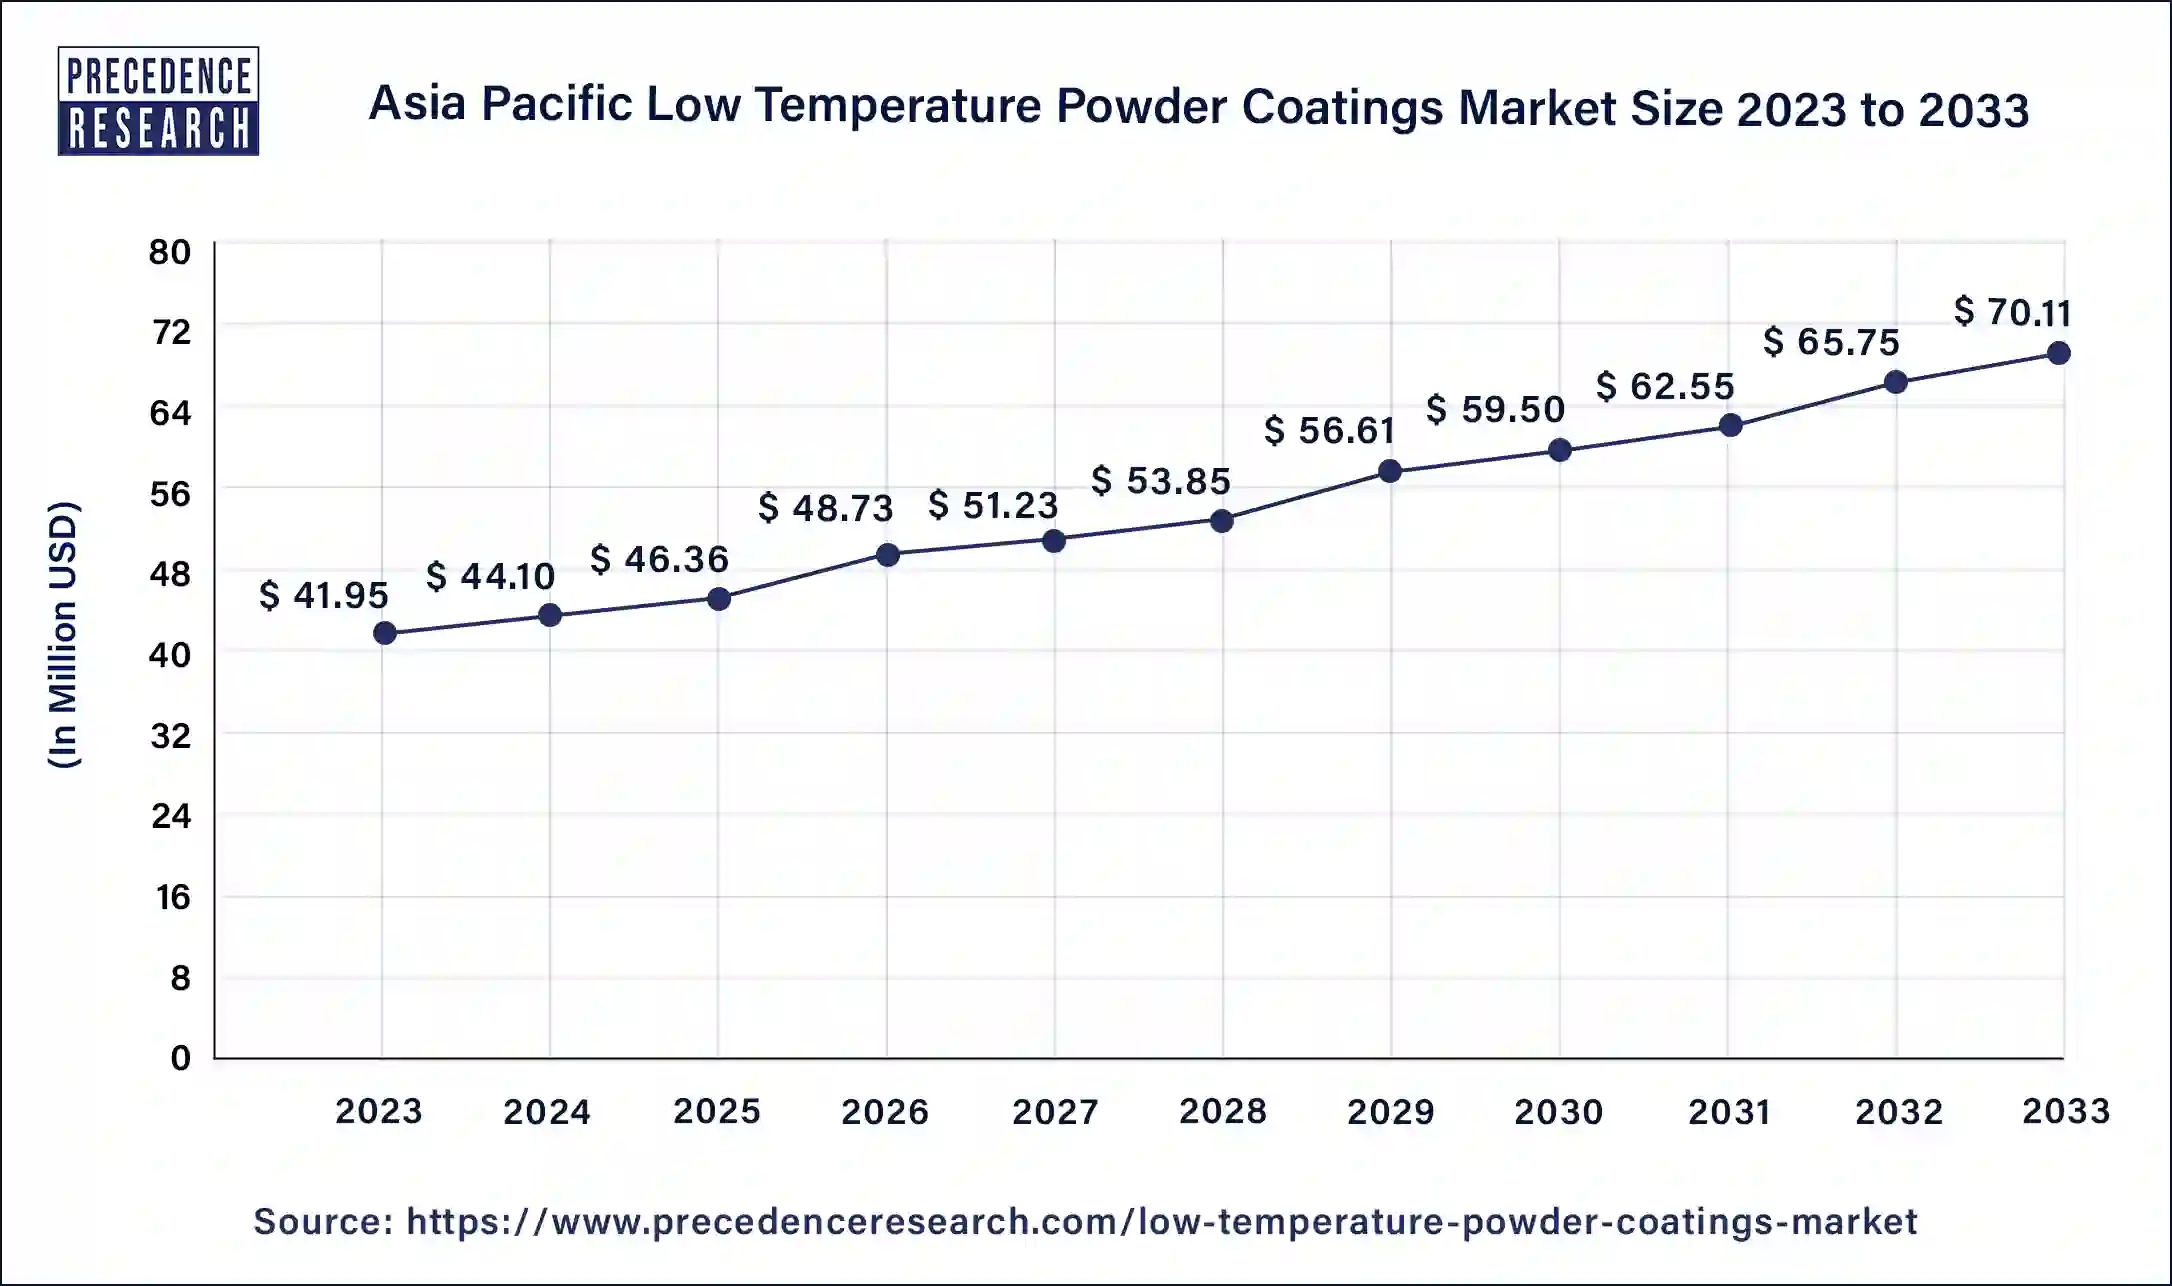 Asia Pacific Low Temperature Powder Coatings Market Size 2024 to 2033